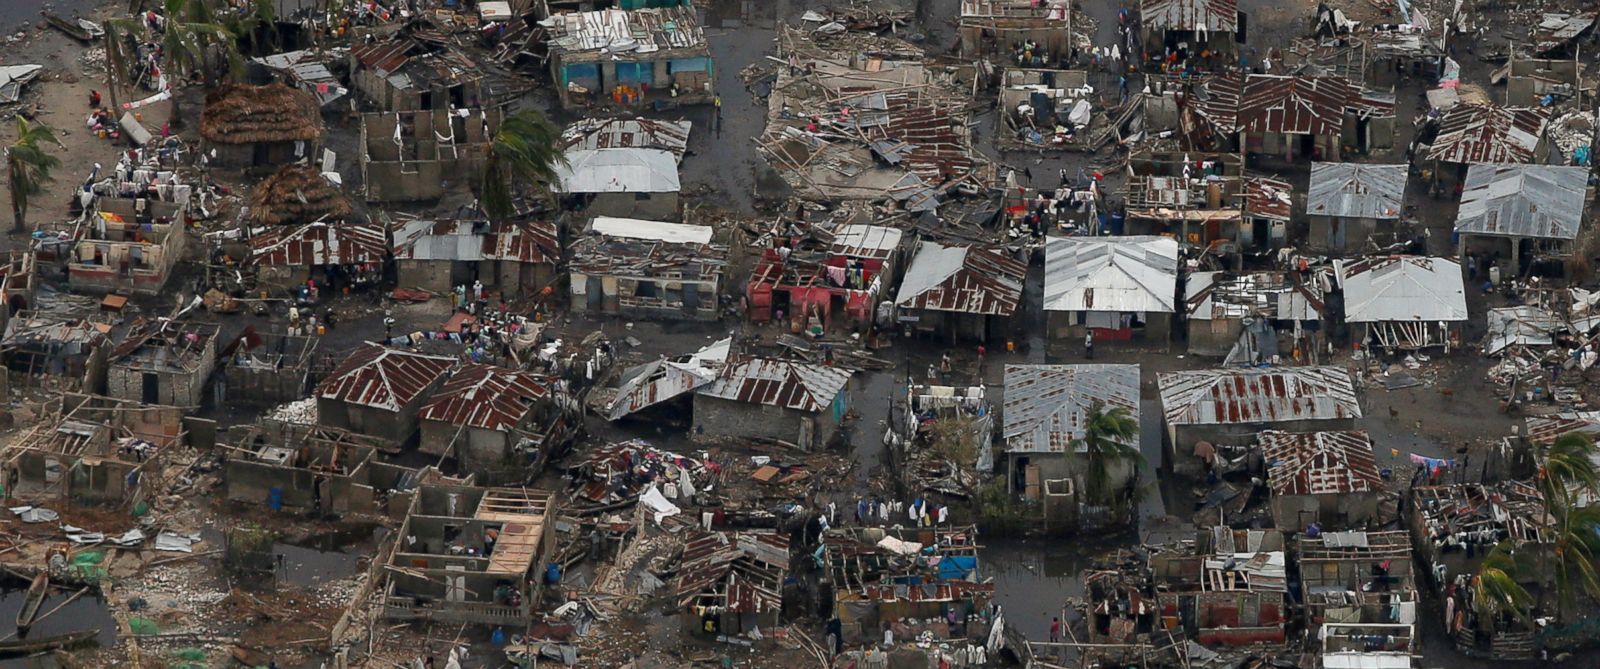 Hundreds Reported Dead in Haiti as Hurricane Death Toll Soars ABC News